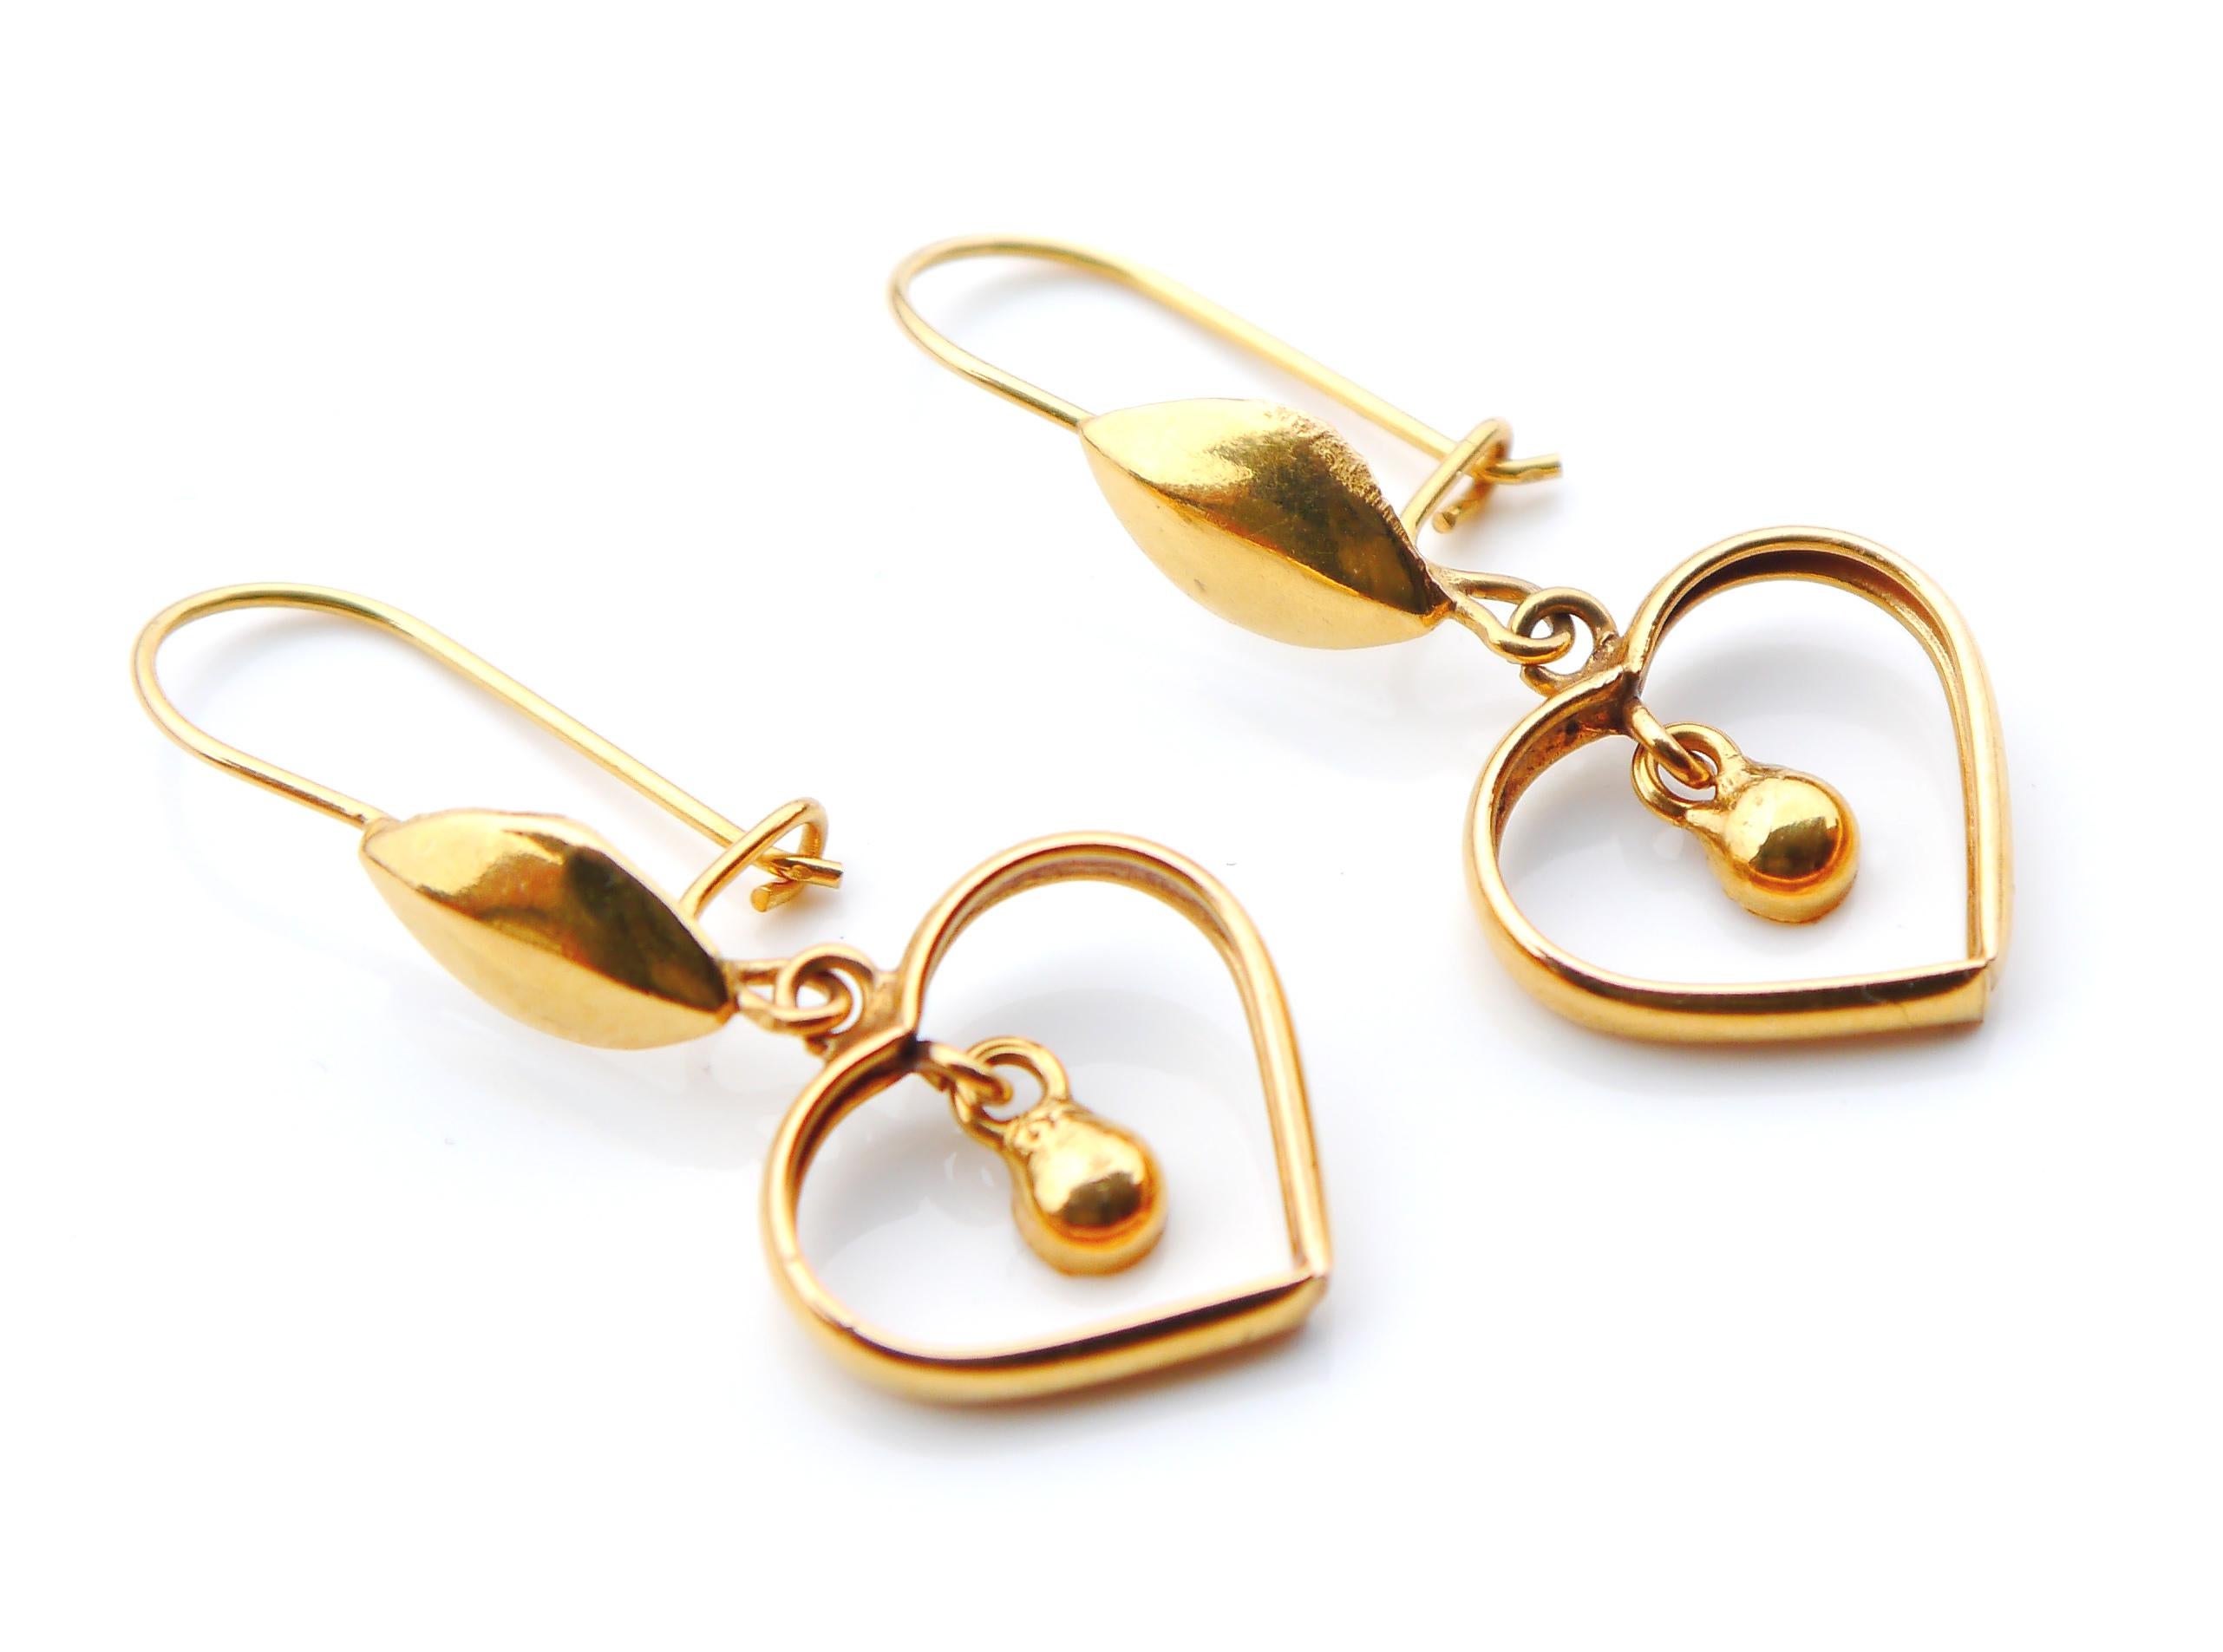 A pair of custom - made Hearts Dangles in solid 21K Yellow Gold. 

Europe or Middle East, ca. 1950s -1960s. No hallmarks, metal tested solid 20/ 21K Gold.

Each earring is 23 mm long. Each heart 14 mm x 14 mm at axes. Weight: 2.3